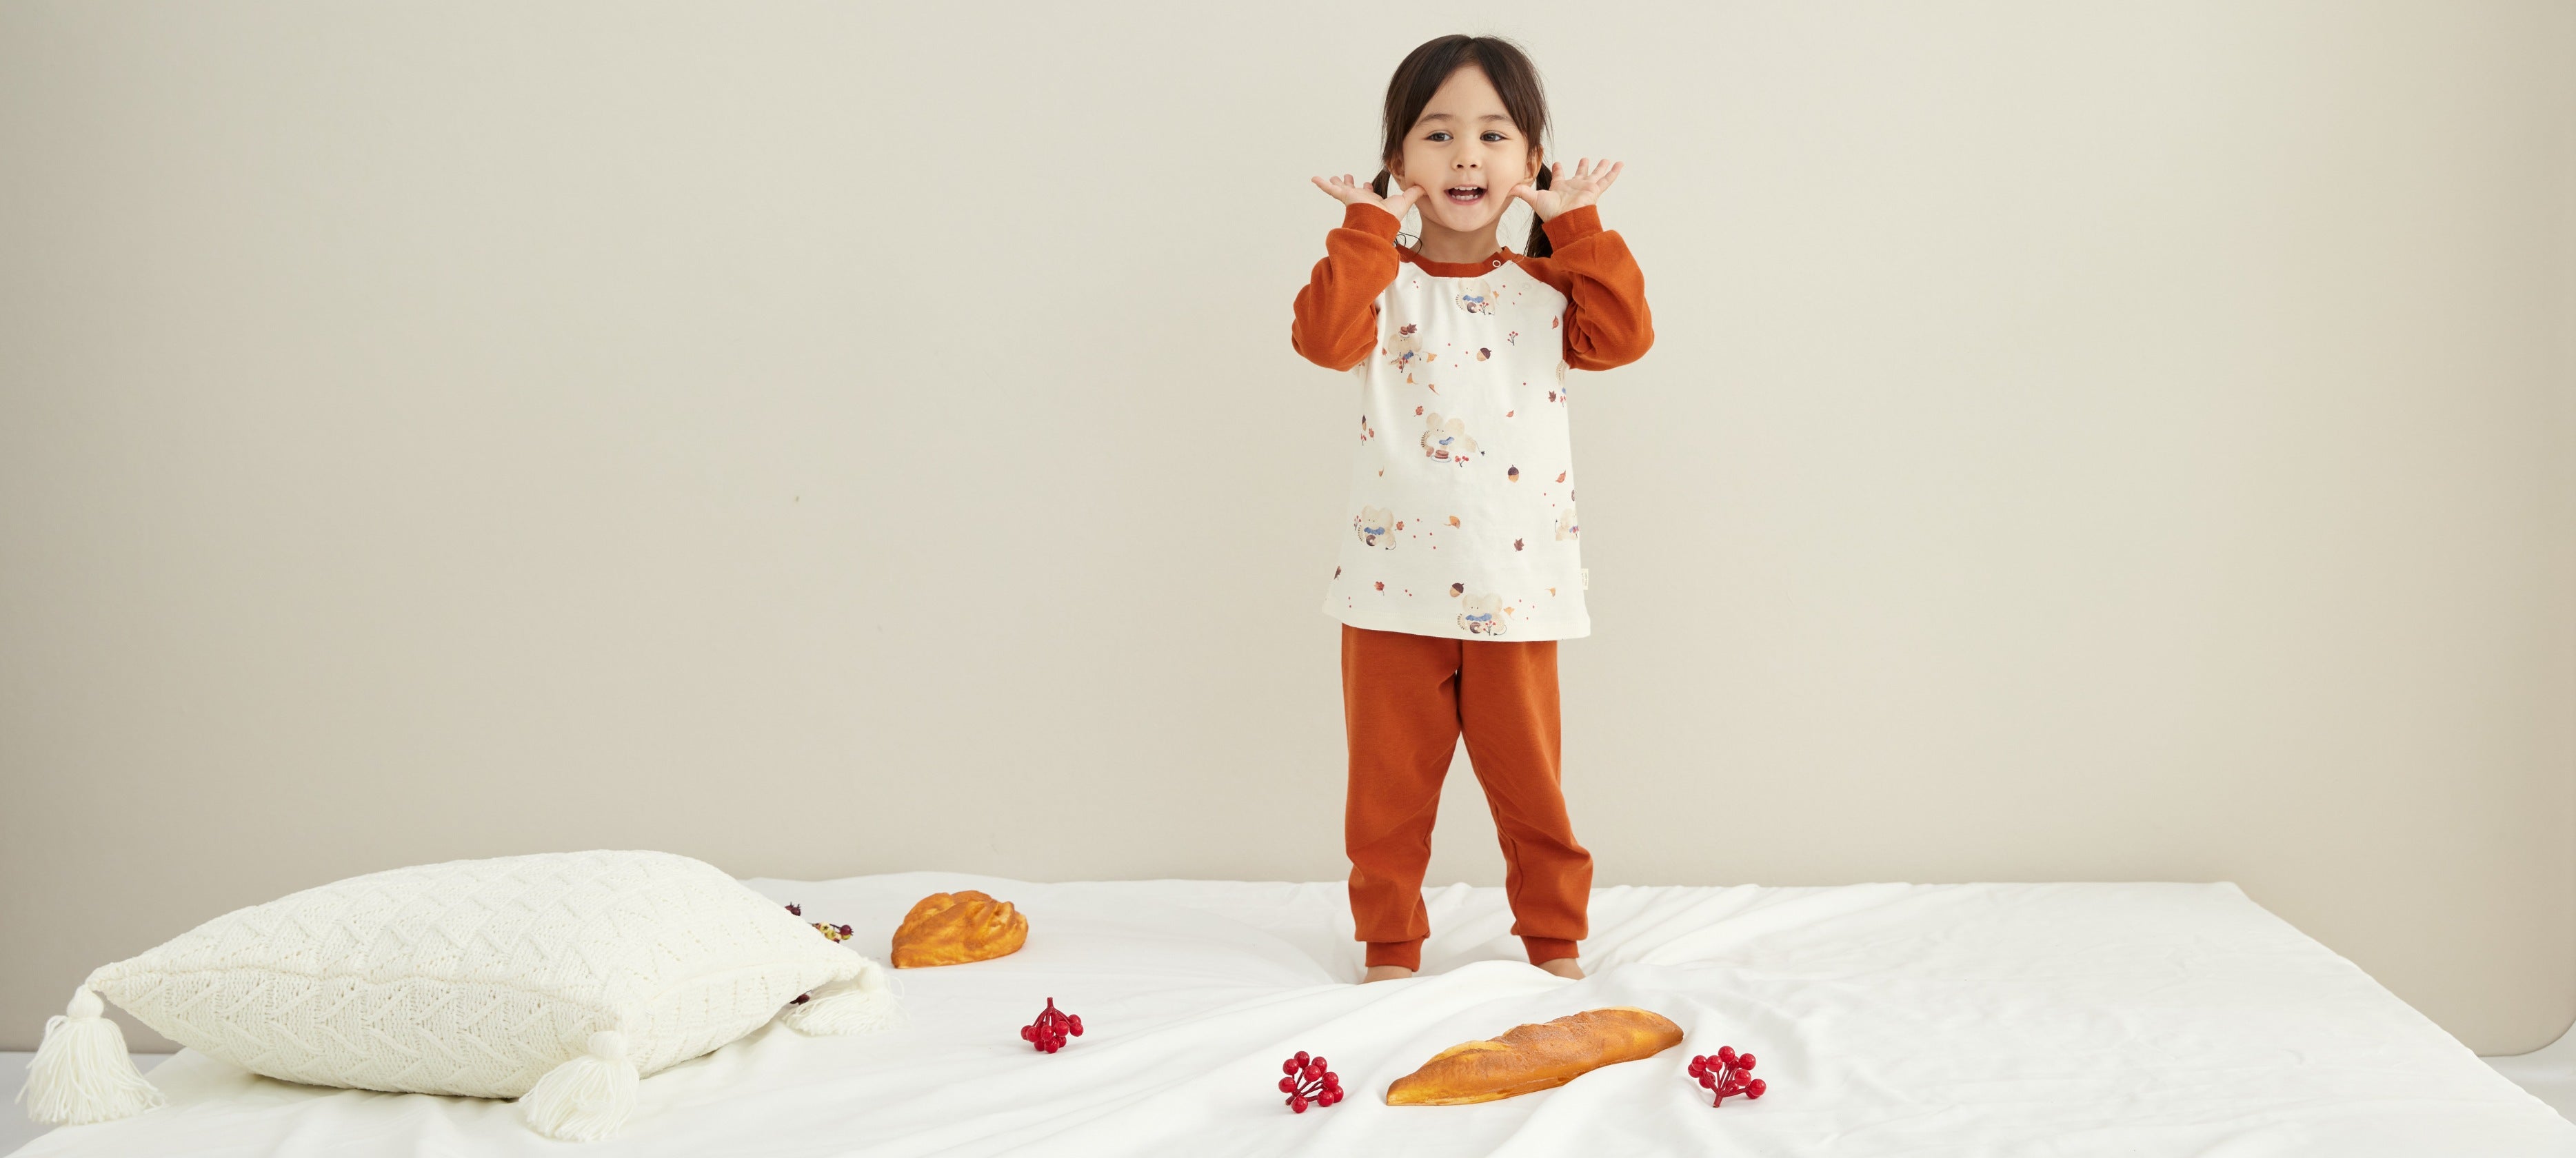 Super Cute girl wearing norsu organic's organic maple-leaf pajamas and standing on the bed